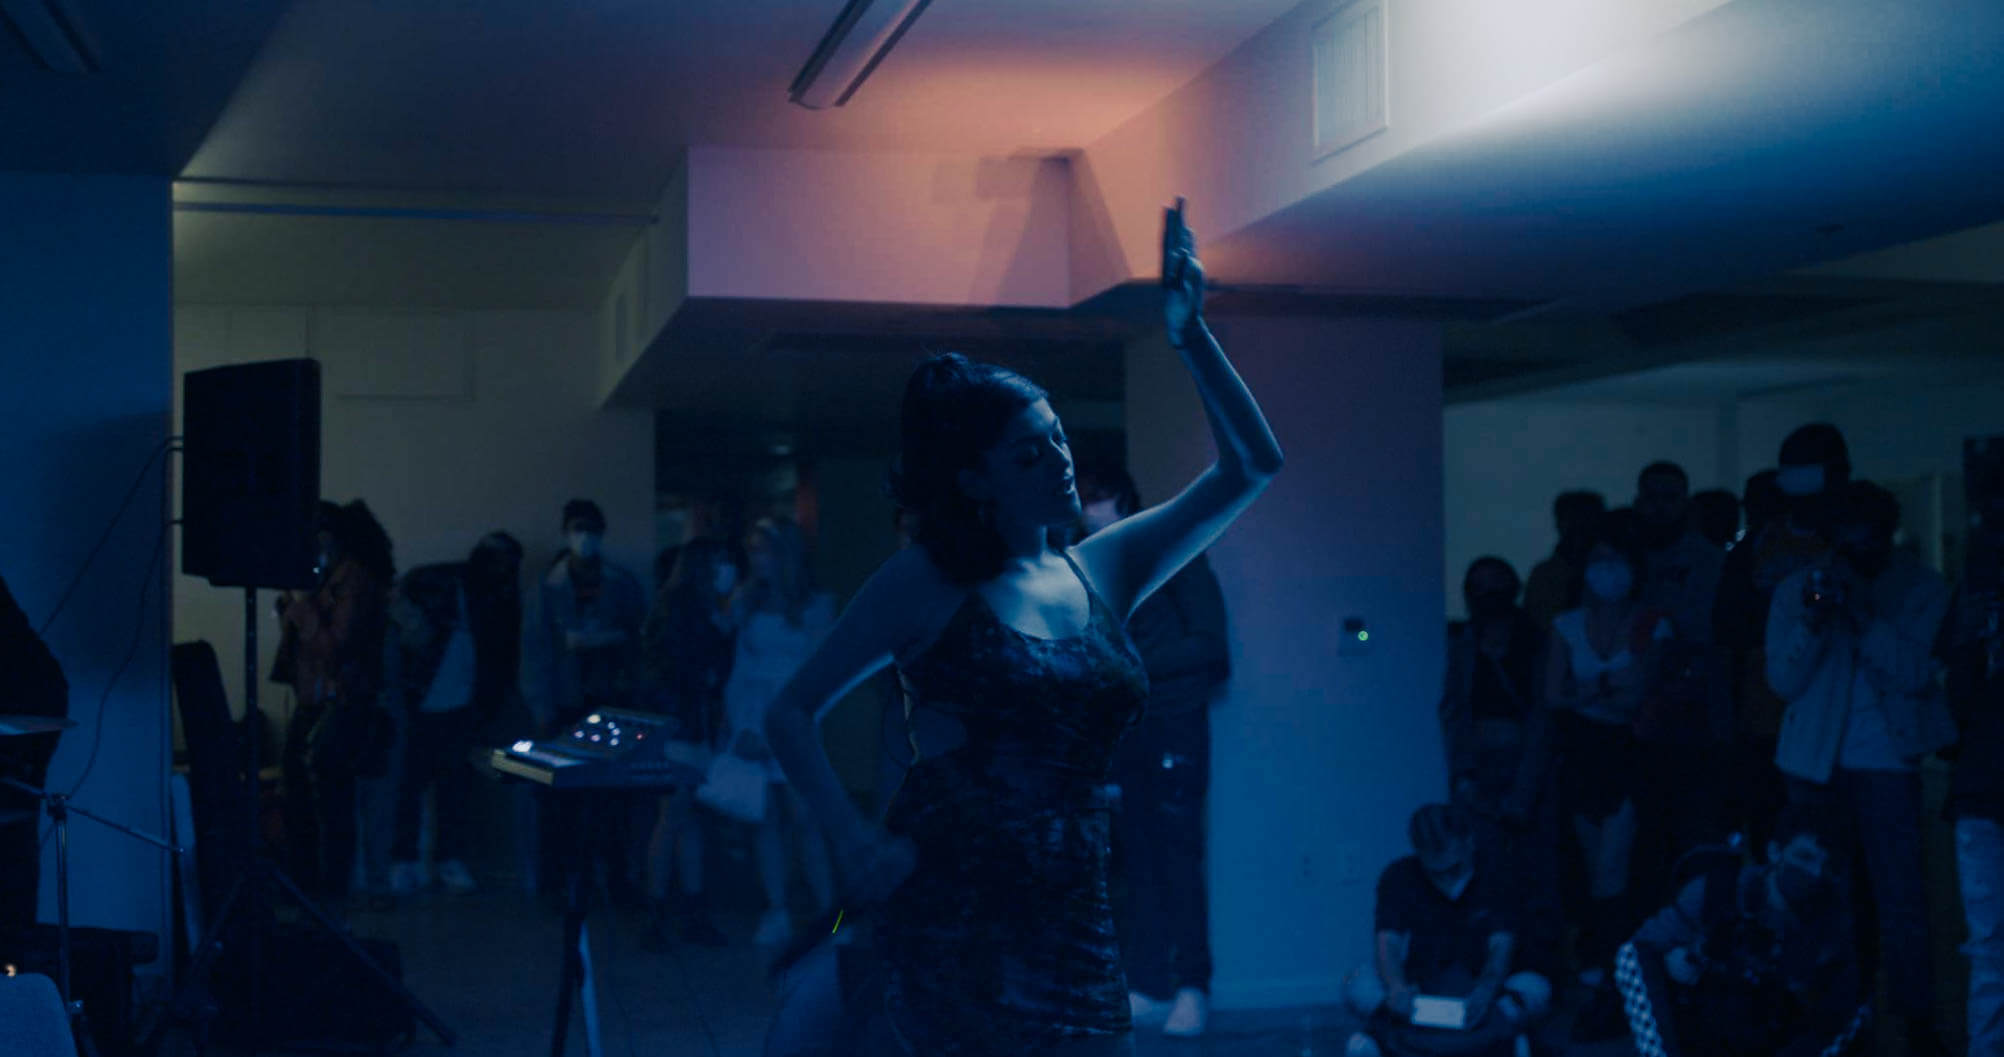 Still from Mija. A woman dances in a dark room surrounded by others.